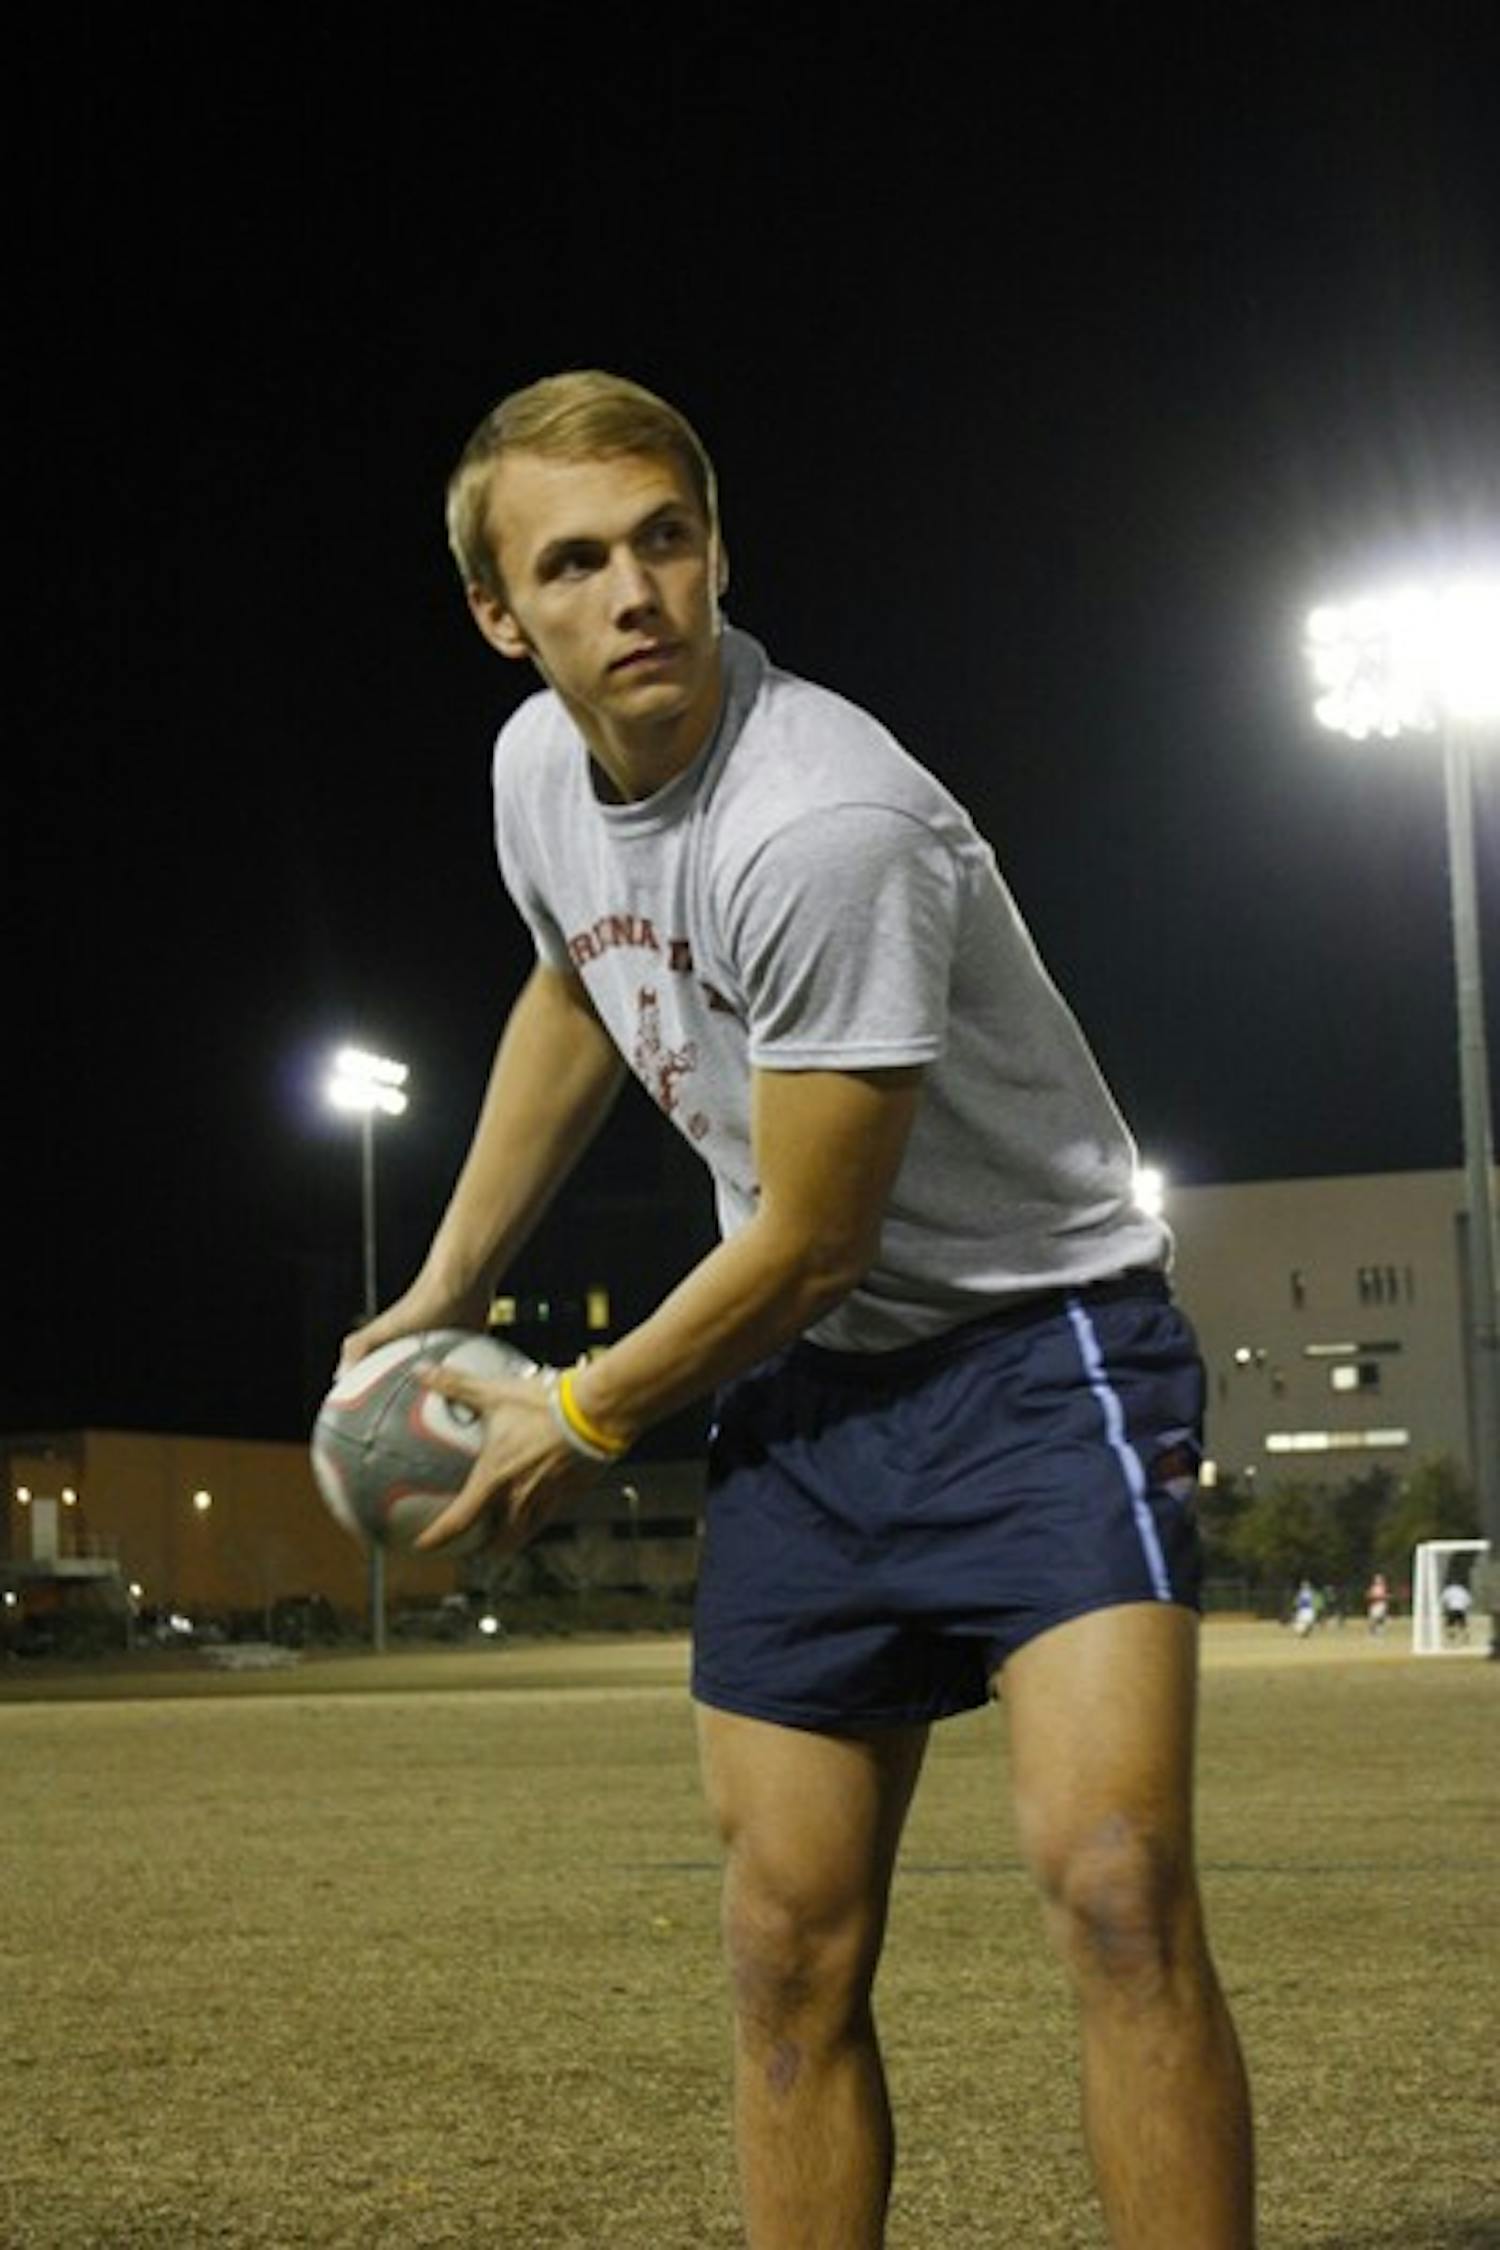 Adam Sandstrom passes the ball before practice Wednesday night. Sandstrom is on a path to international success, playing on both the ASU men’s and USA Rugby men’s national U-20 teams. (Photo by Cameron Tattle)